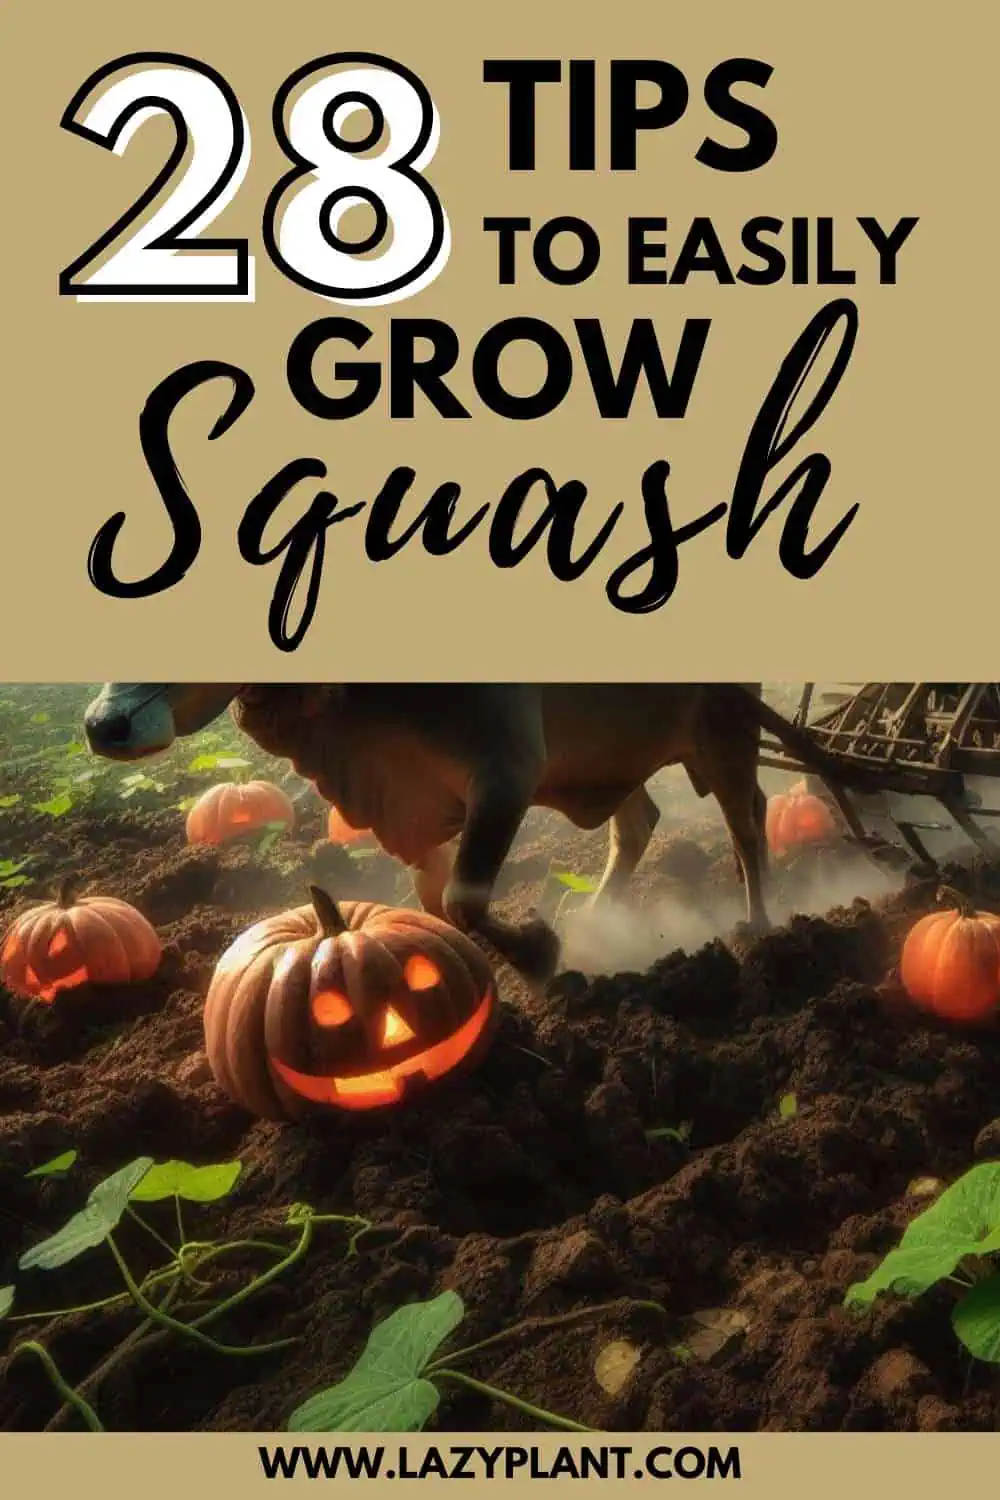 Tips for Squash Cultivation